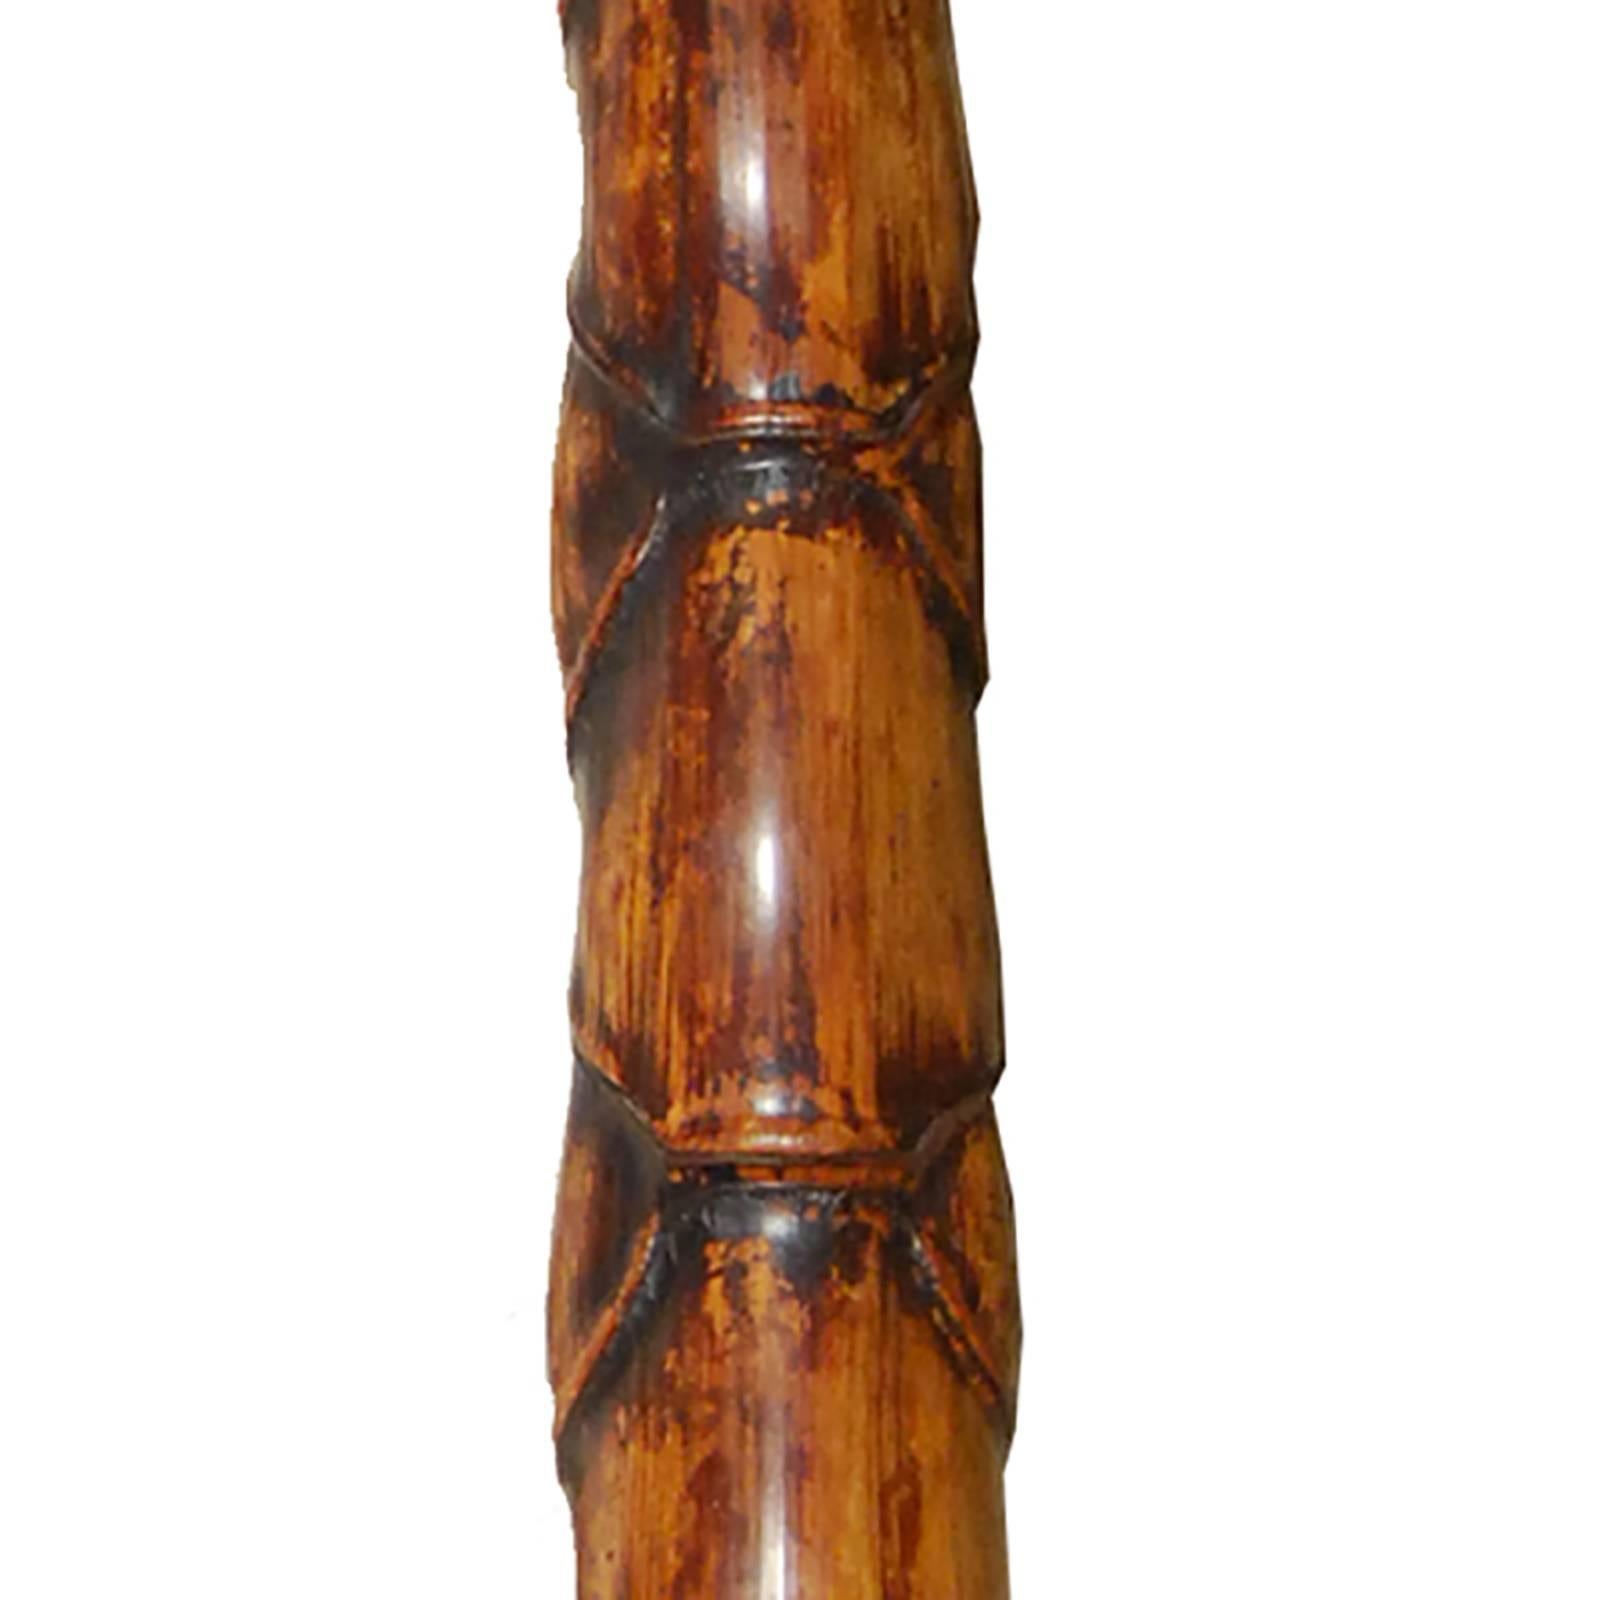 This 19th century sculptural form is made from a species of bamboo called Buddha Belly. It was originally used as a pipe in southern China. Buddha belly is a trained species of bamboo that is purposefully deprived of water during growth to cause the